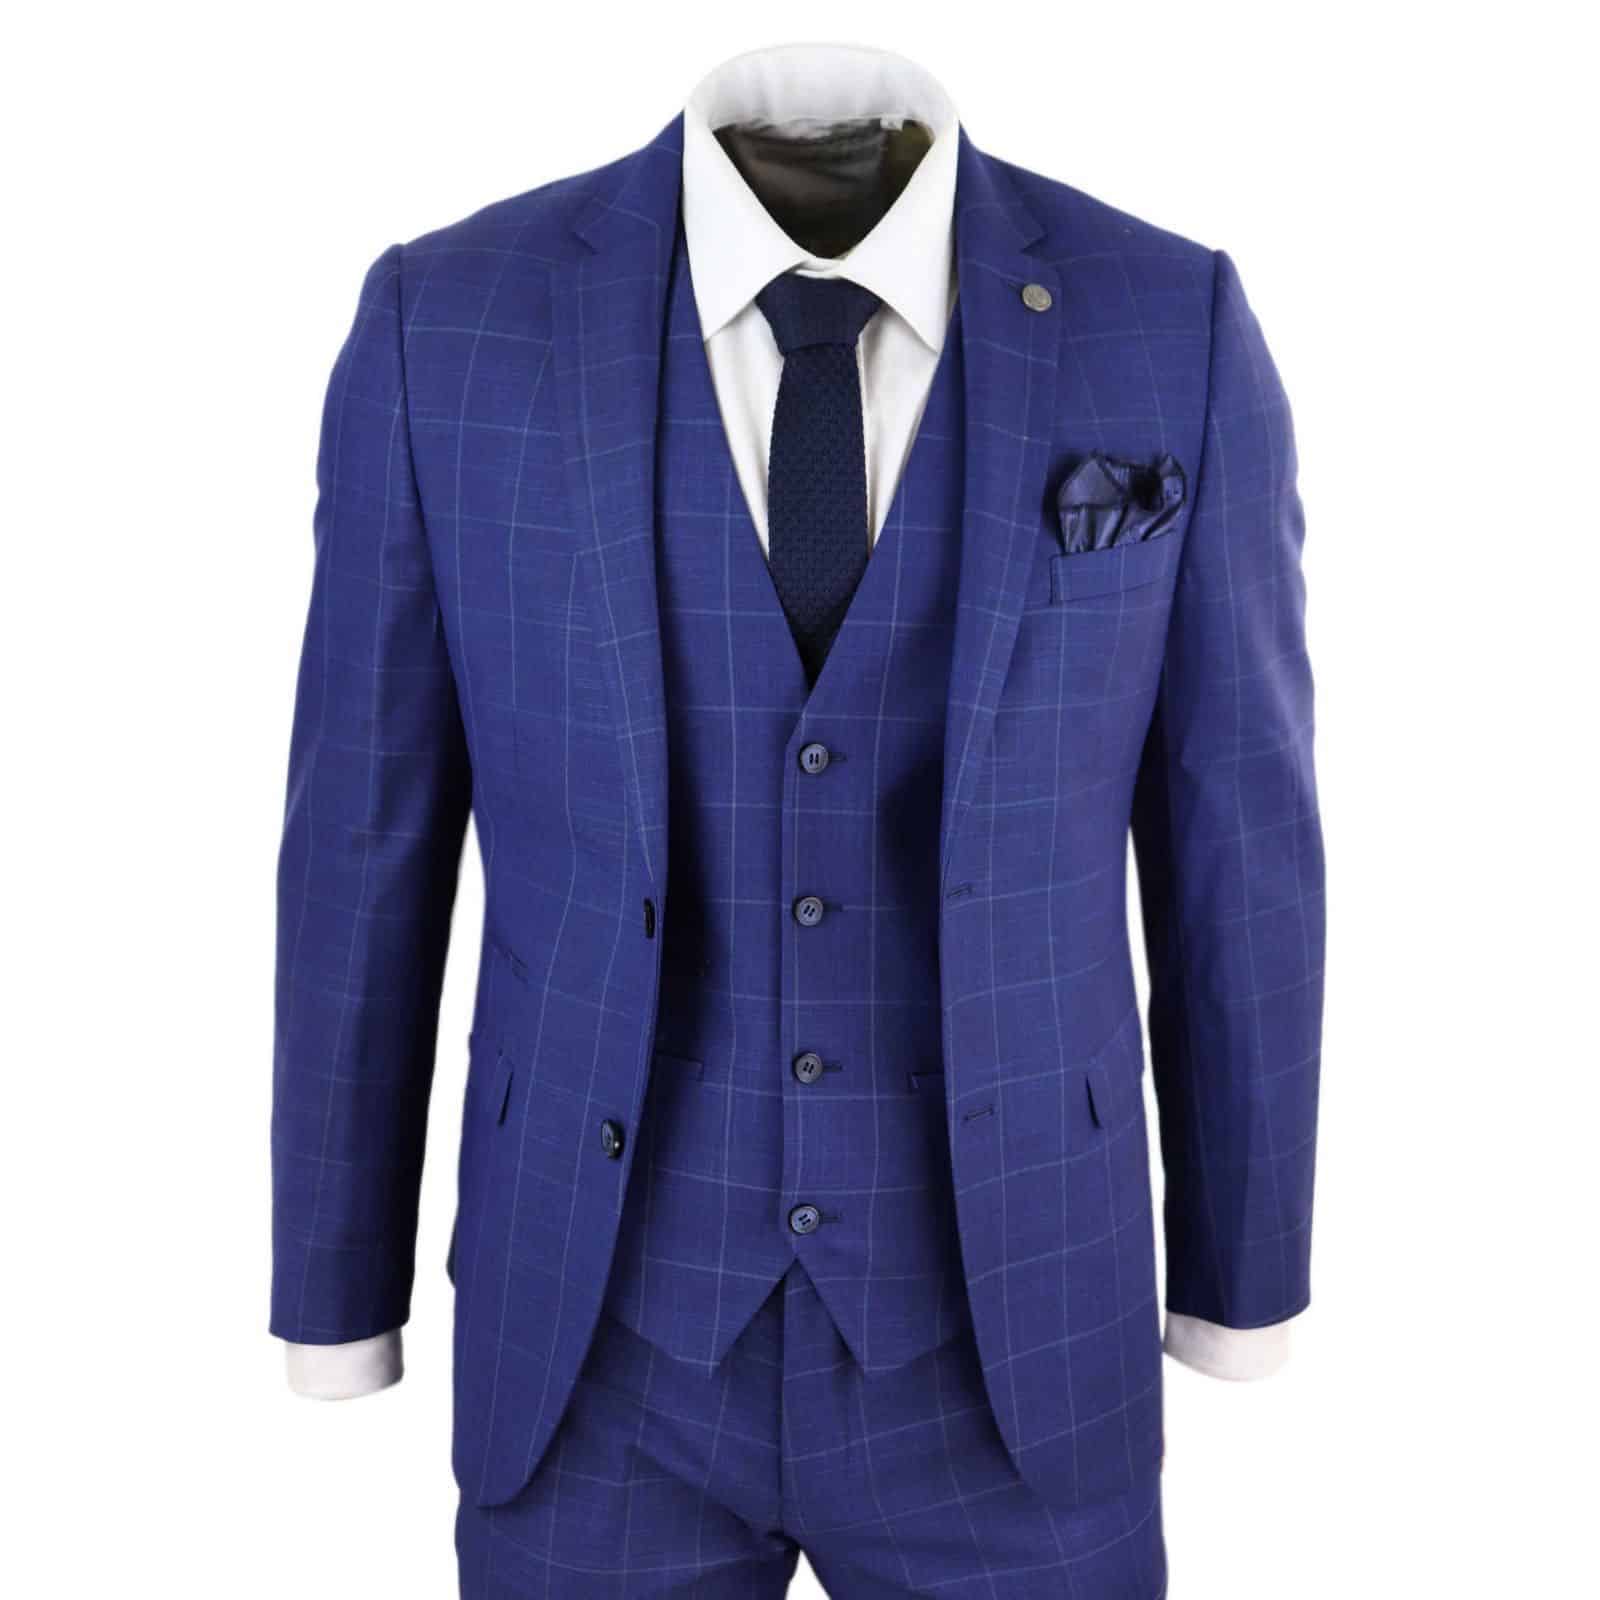 Mens Royal Blue 3 Piece Check Suit - Paul Andrew Rover: Buy Online